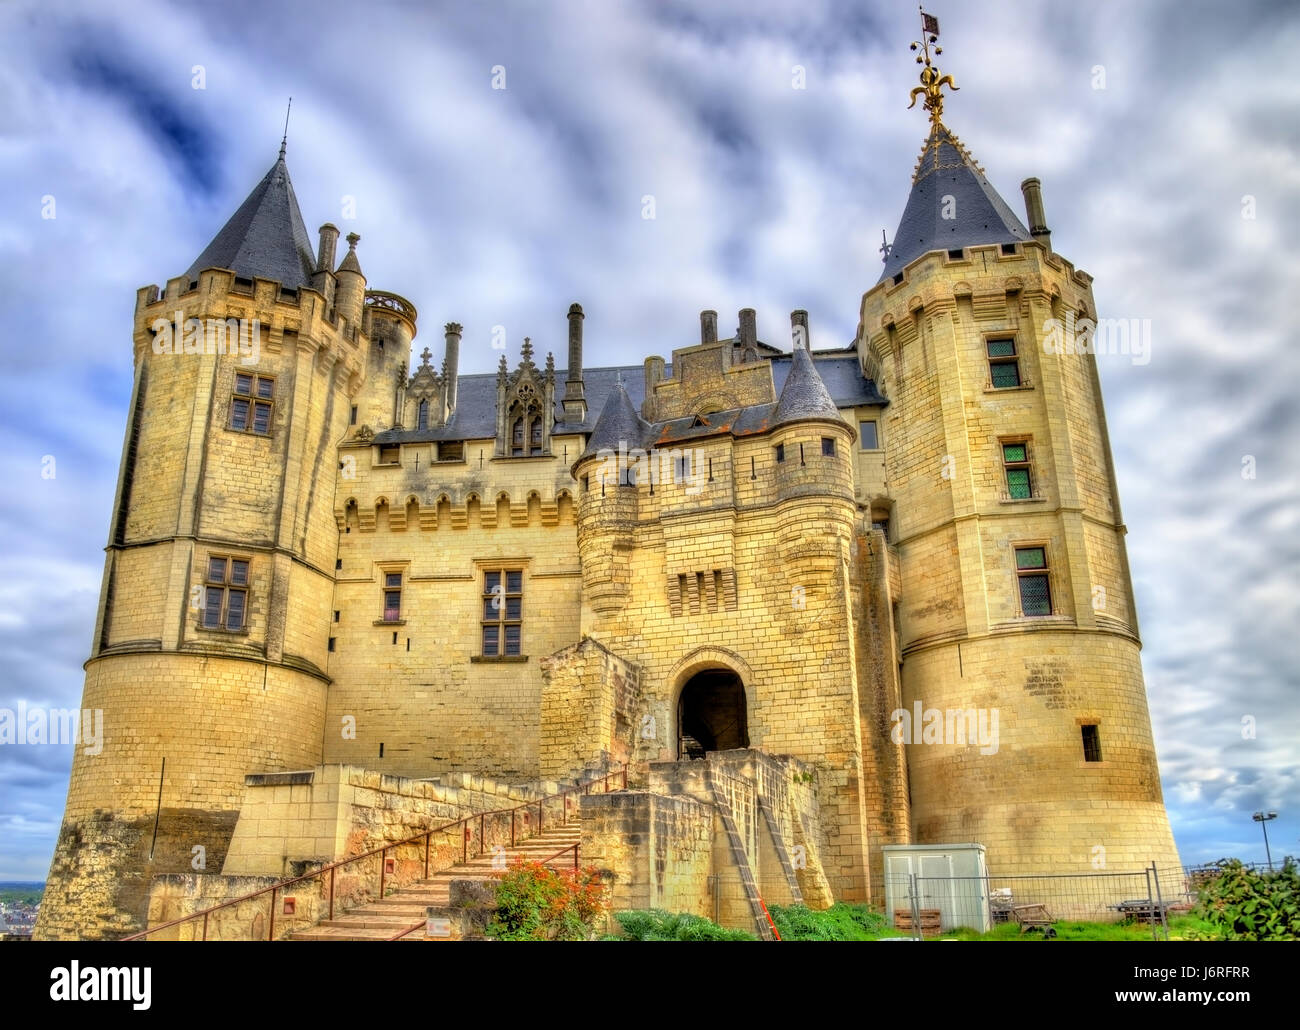 Chateau de Saumur in the Loire Valley, France Stock Photo